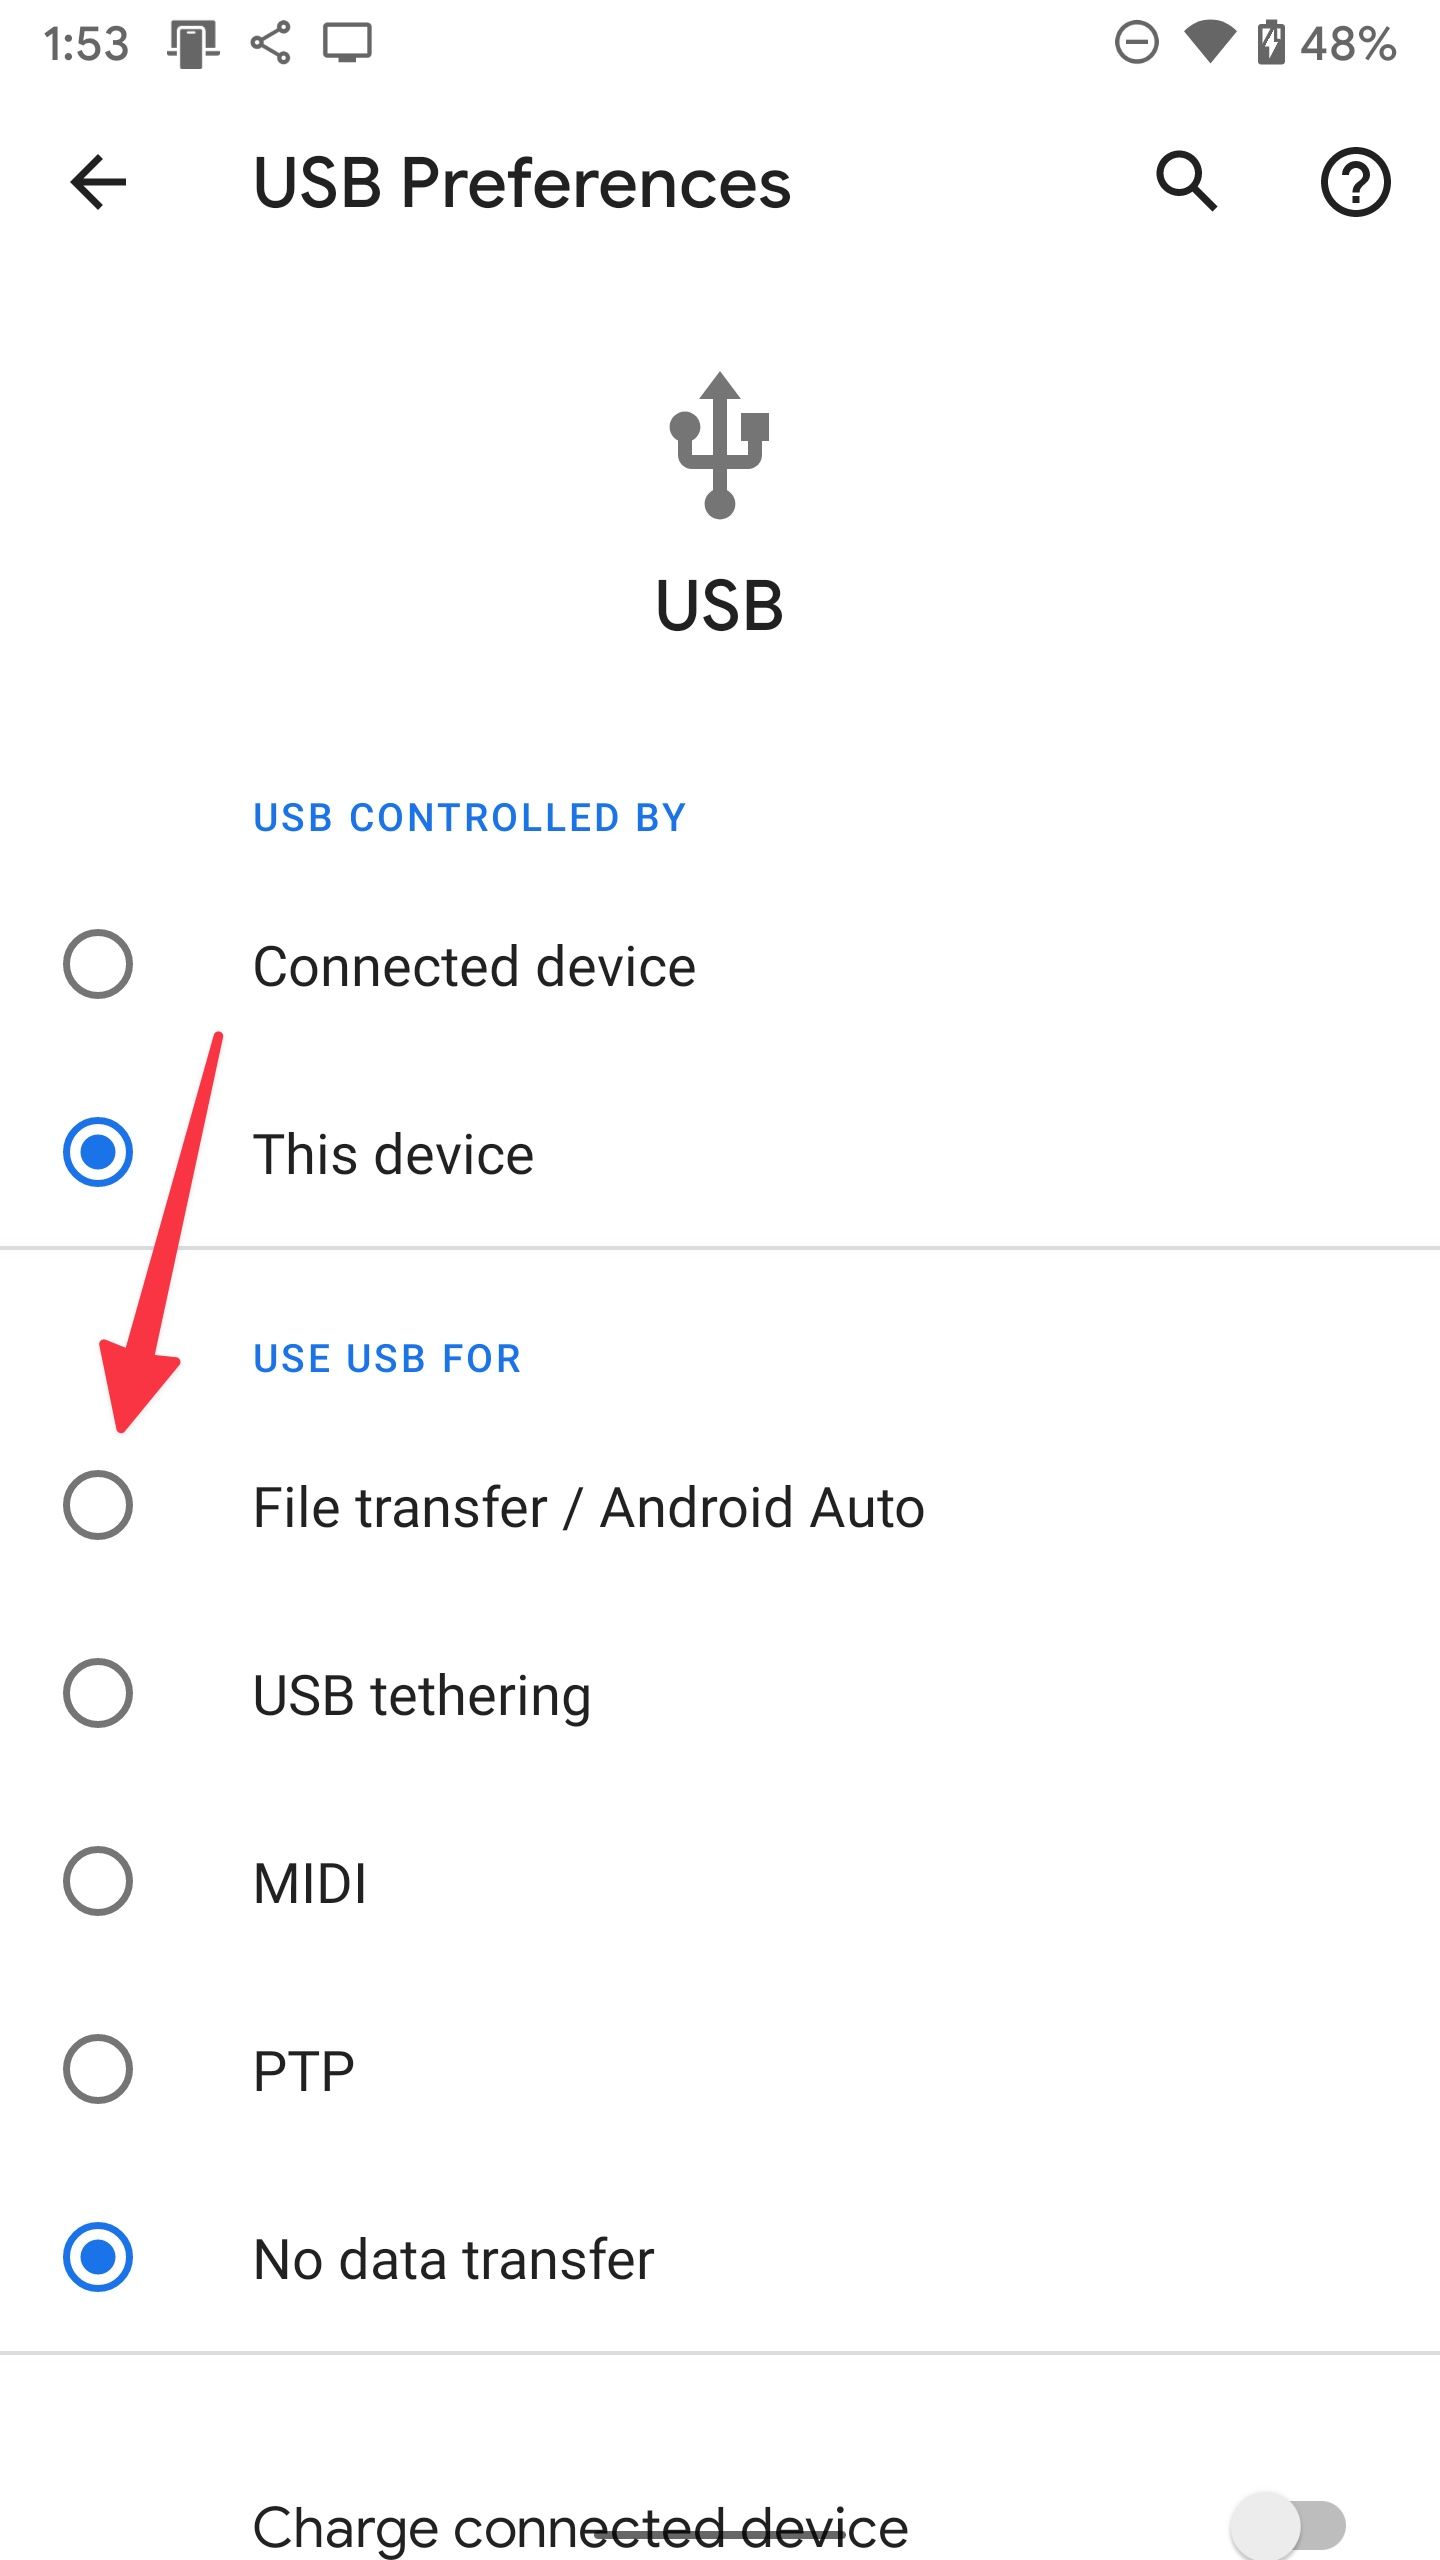 File transfer from Android